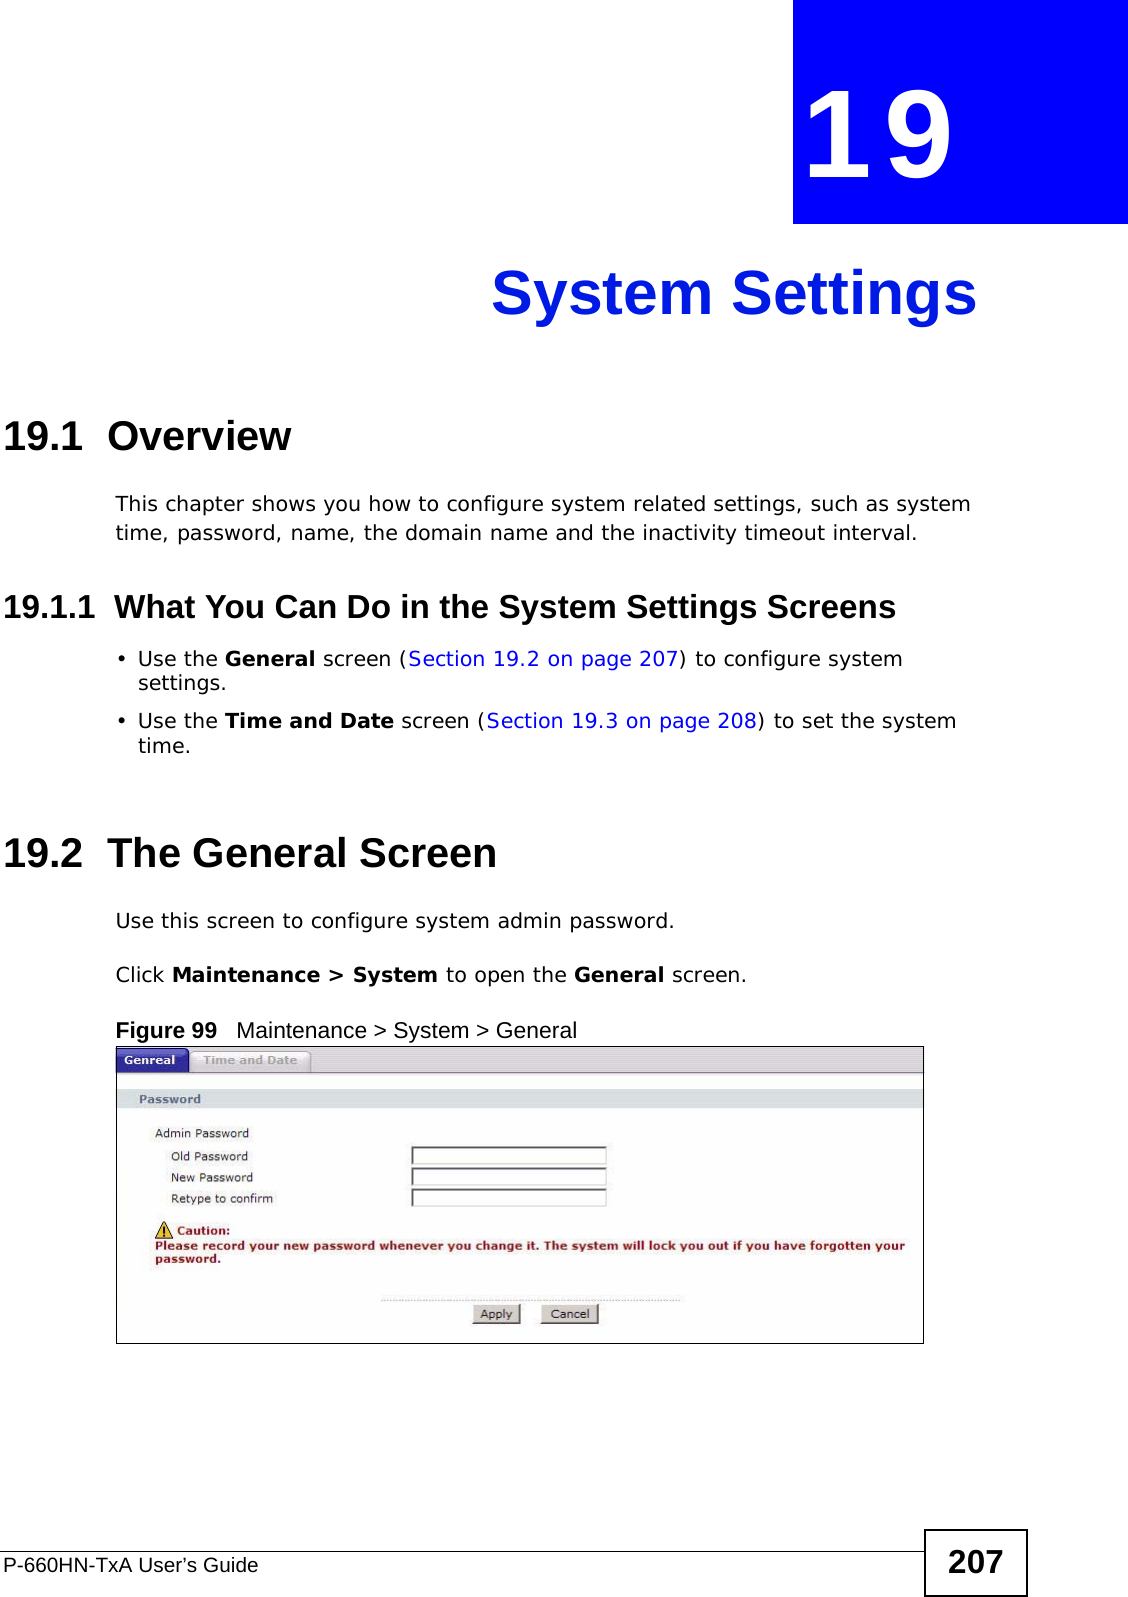 P-660HN-TxA User’s Guide 207CHAPTER  19 System Settings19.1  OverviewThis chapter shows you how to configure system related settings, such as system time, password, name, the domain name and the inactivity timeout interval.    19.1.1  What You Can Do in the System Settings Screens•Use the General screen (Section 19.2 on page 207) to configure system settings.•Use the Time and Date screen (Section 19.3 on page 208) to set the system time.19.2  The General ScreenUse this screen to configure system admin password.Click Maintenance &gt; System to open the General screen. Figure 99   Maintenance &gt; System &gt; General